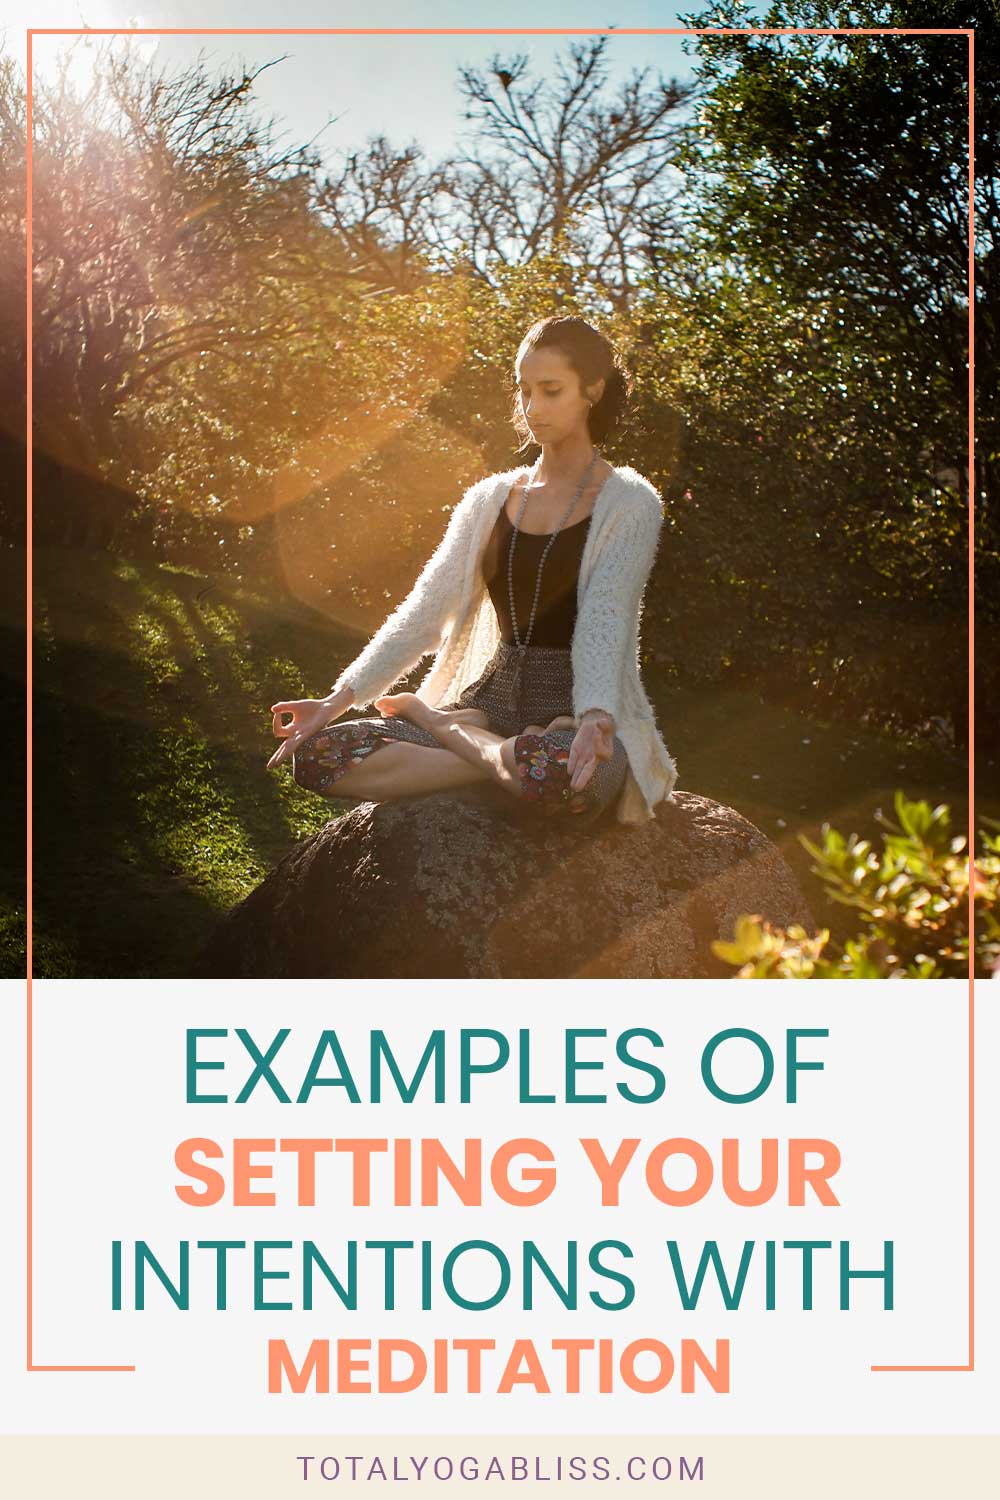 Girl in white sweater doing yoga on a rock - Examples of Setting Your Intentions with Meditation